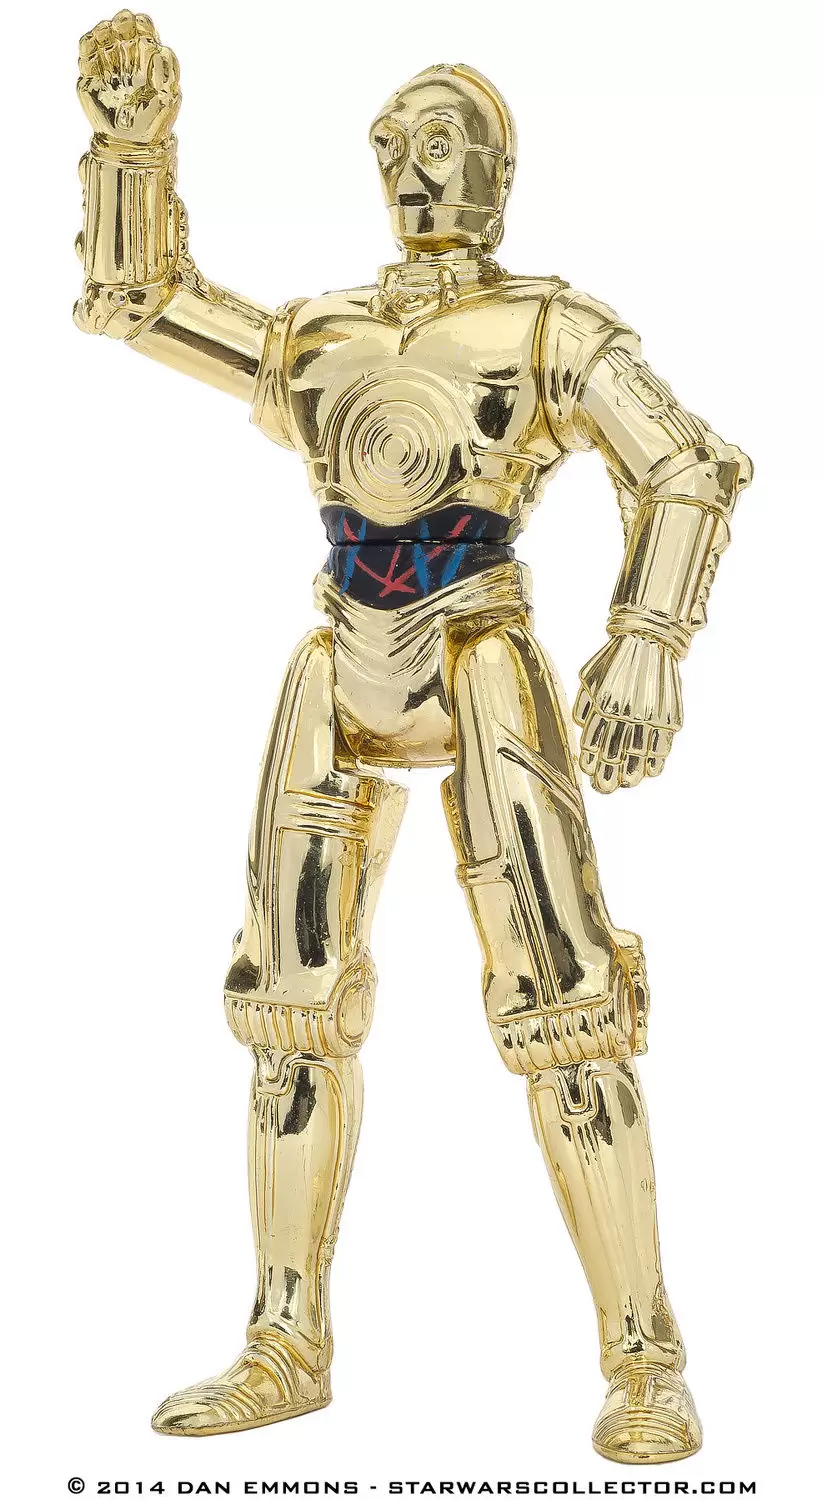 Power of the Force 2 - C-3PO with Realistic Metallized Body